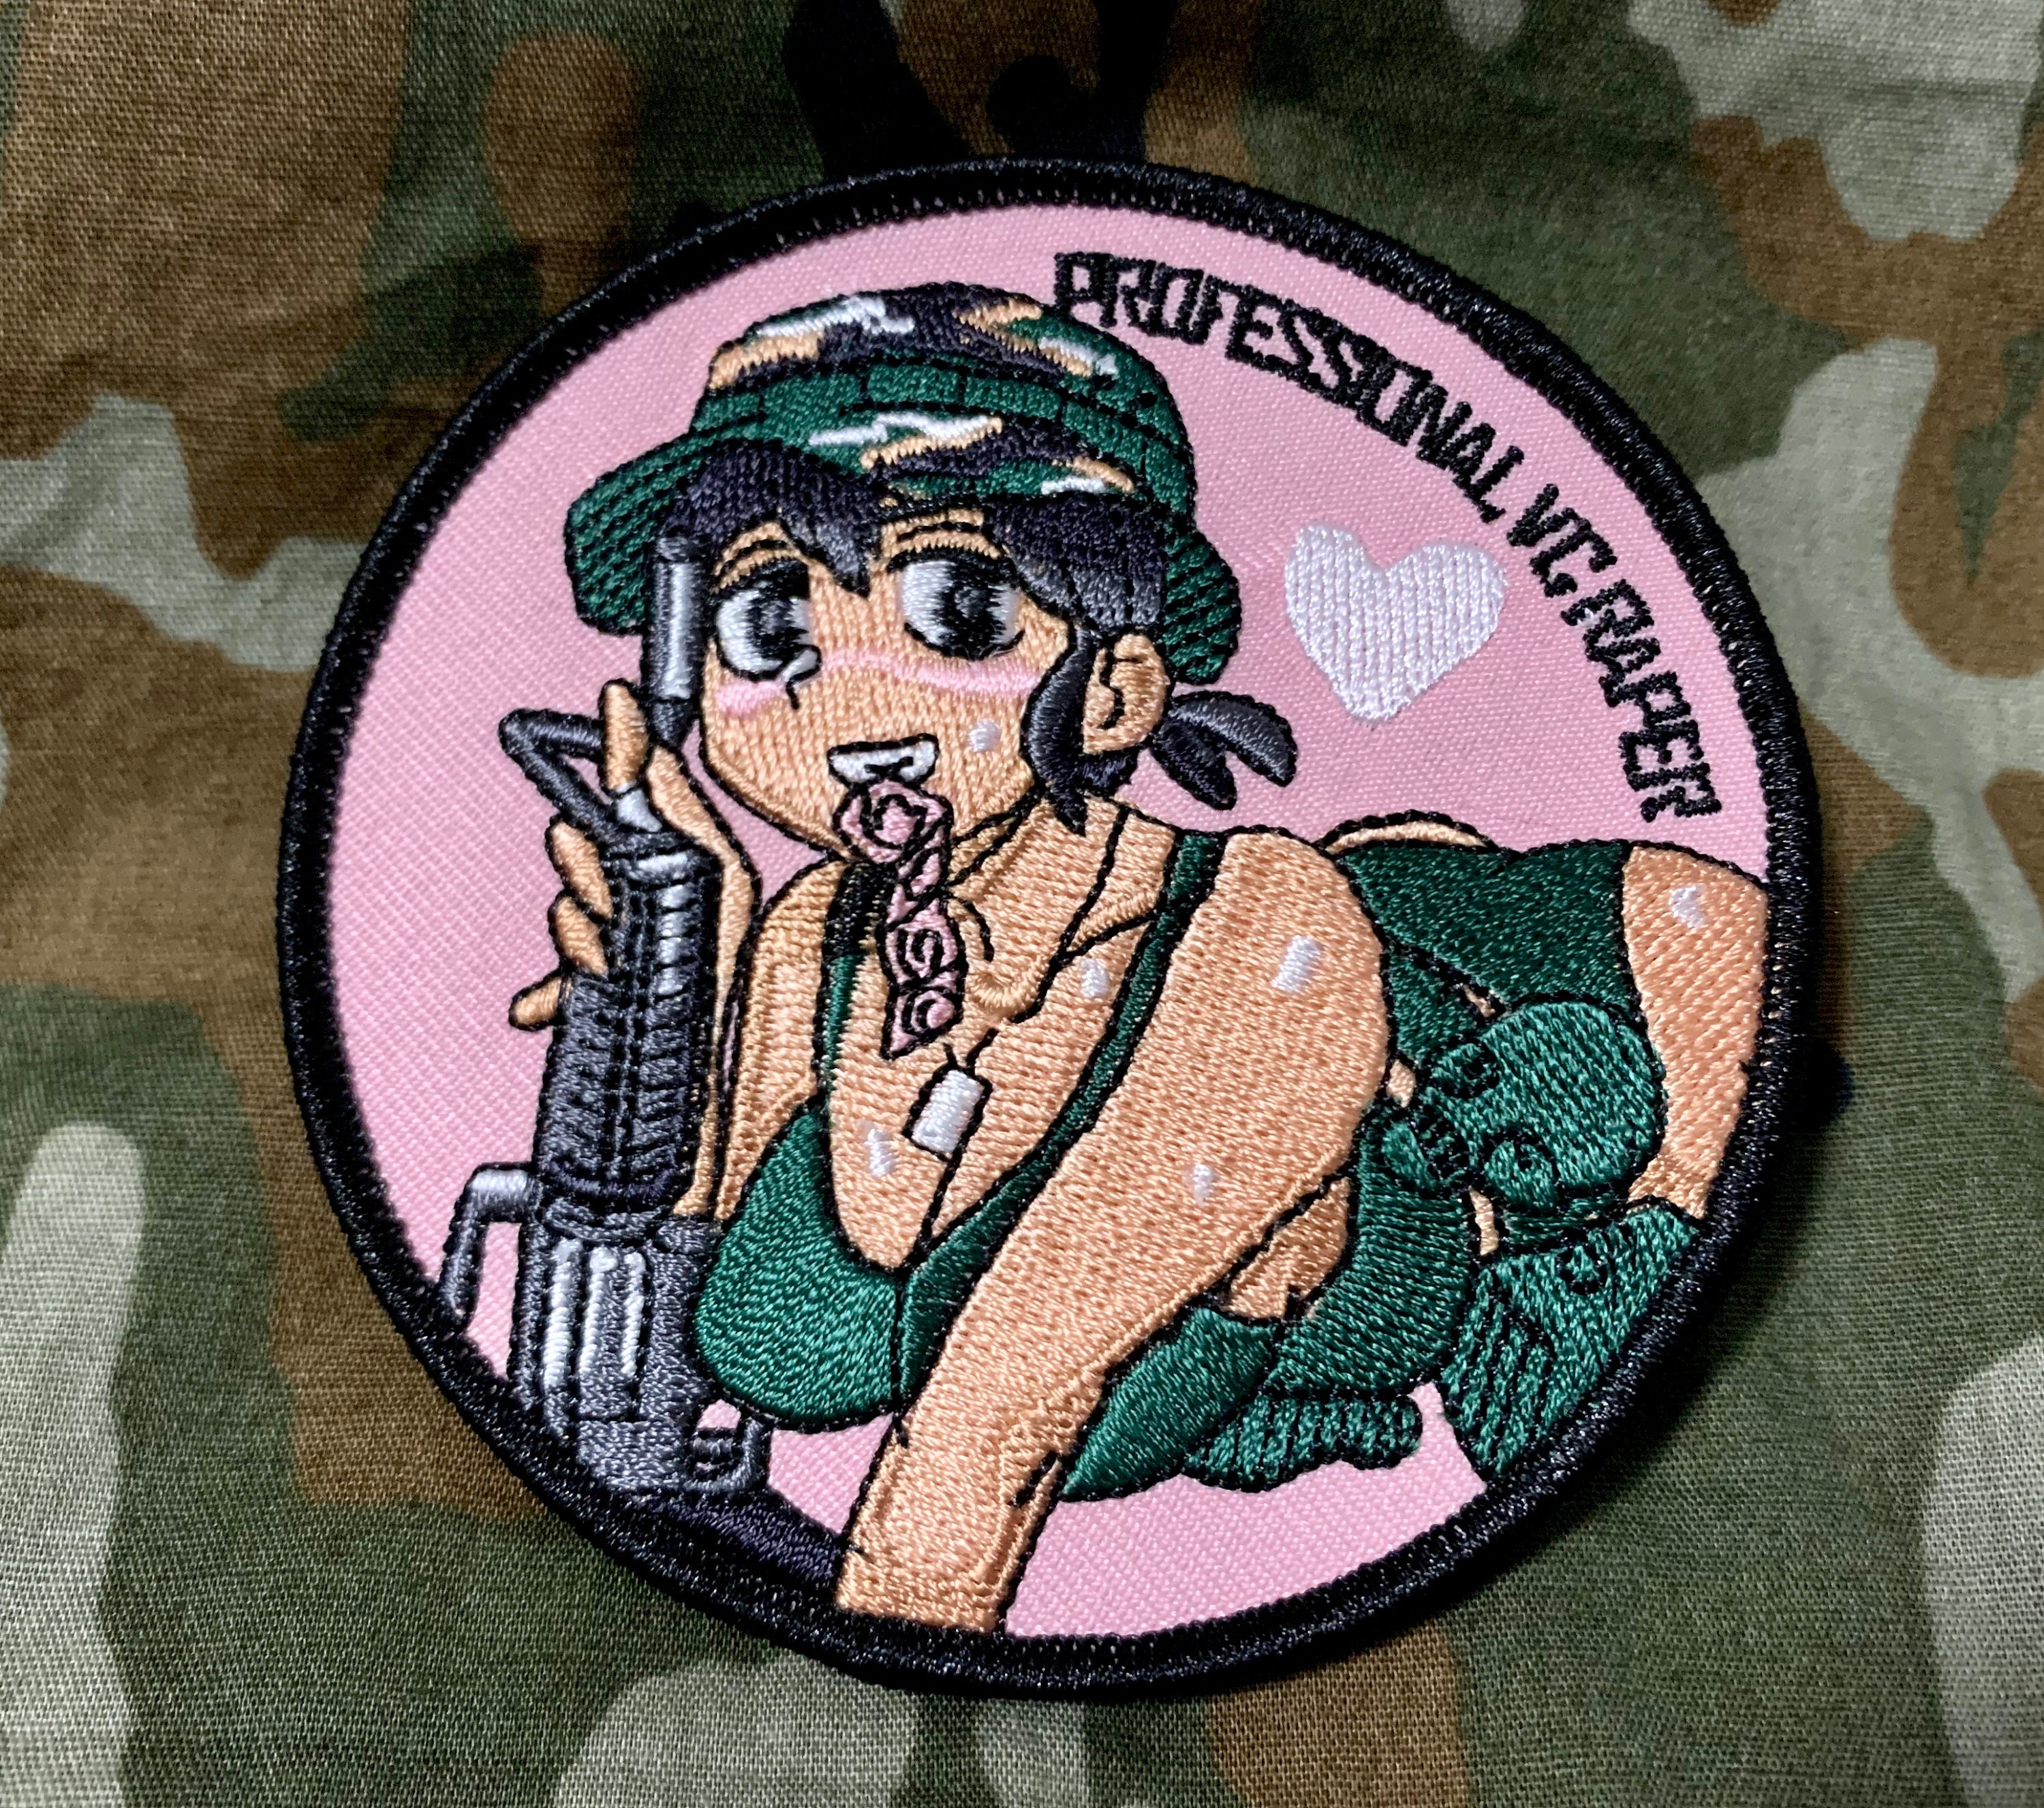 Products | Funny patches, Morale patch, Patches